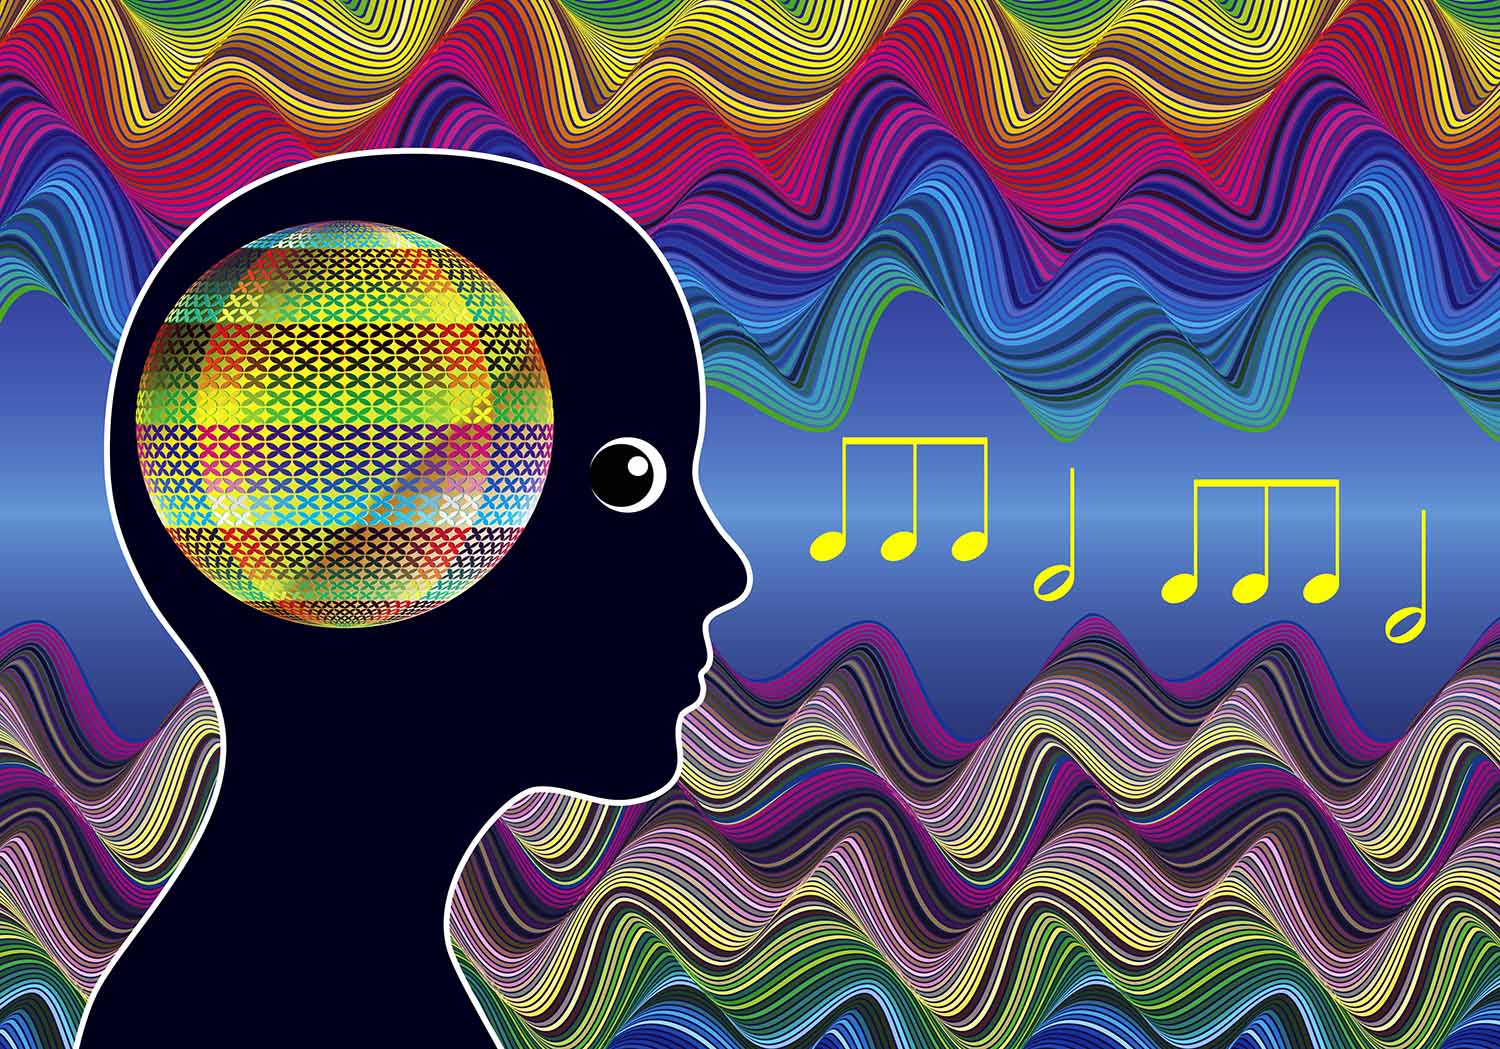 Black-silhouette-with-musical-notes-rainbow-colors-1500-x-1049-px.jpg